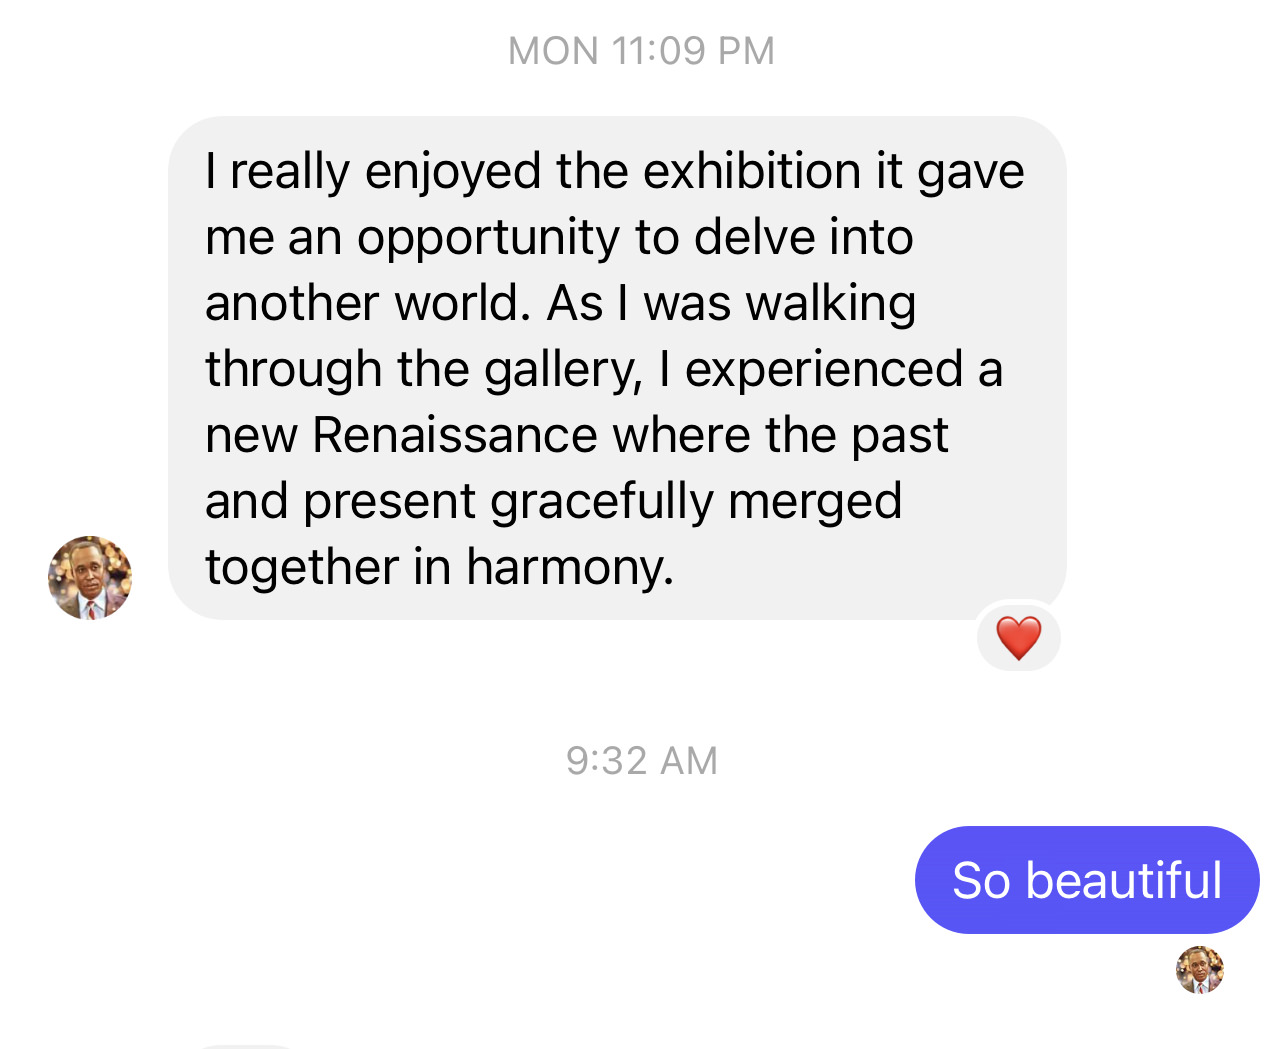 A review of the exhibition